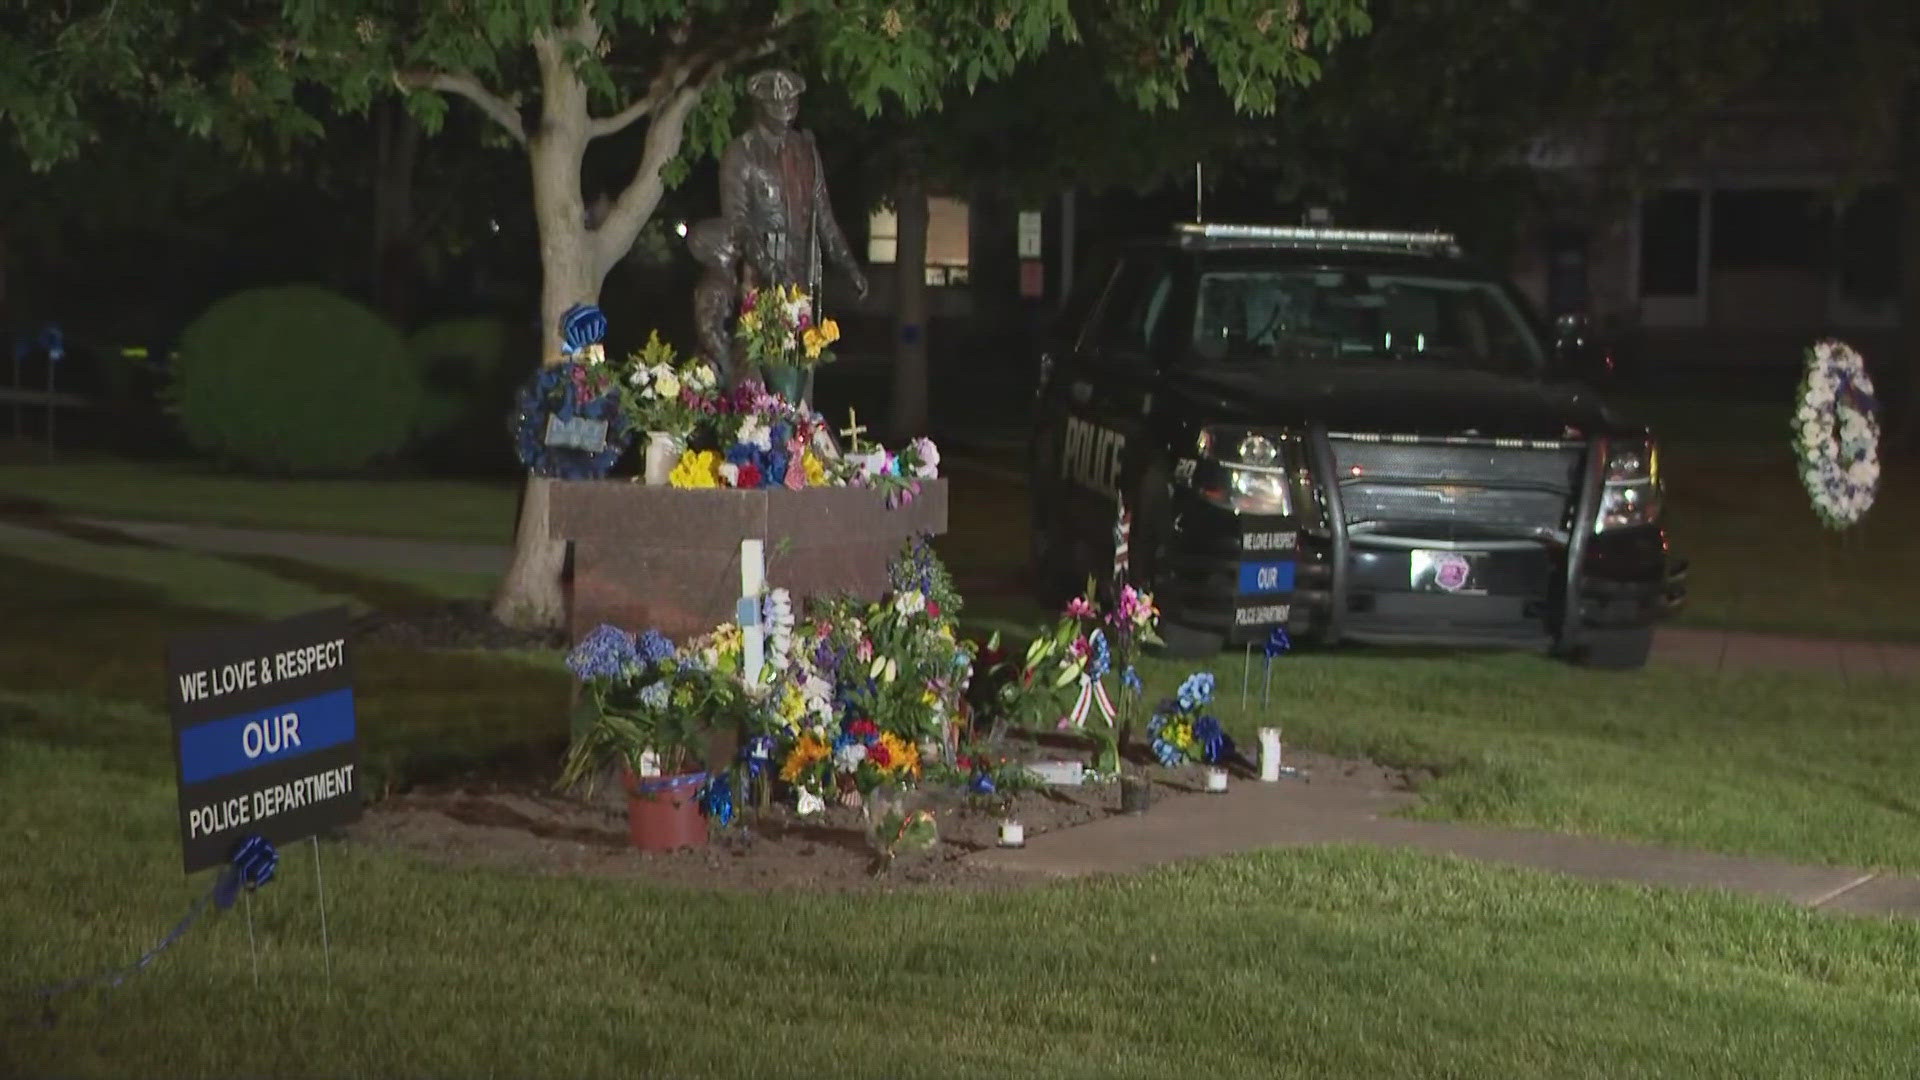 A memorial outside of the Euclid Police Department continues to grow in honor of fallen officer Jacob Derbin after he was killed in the line of duty on Saturday.